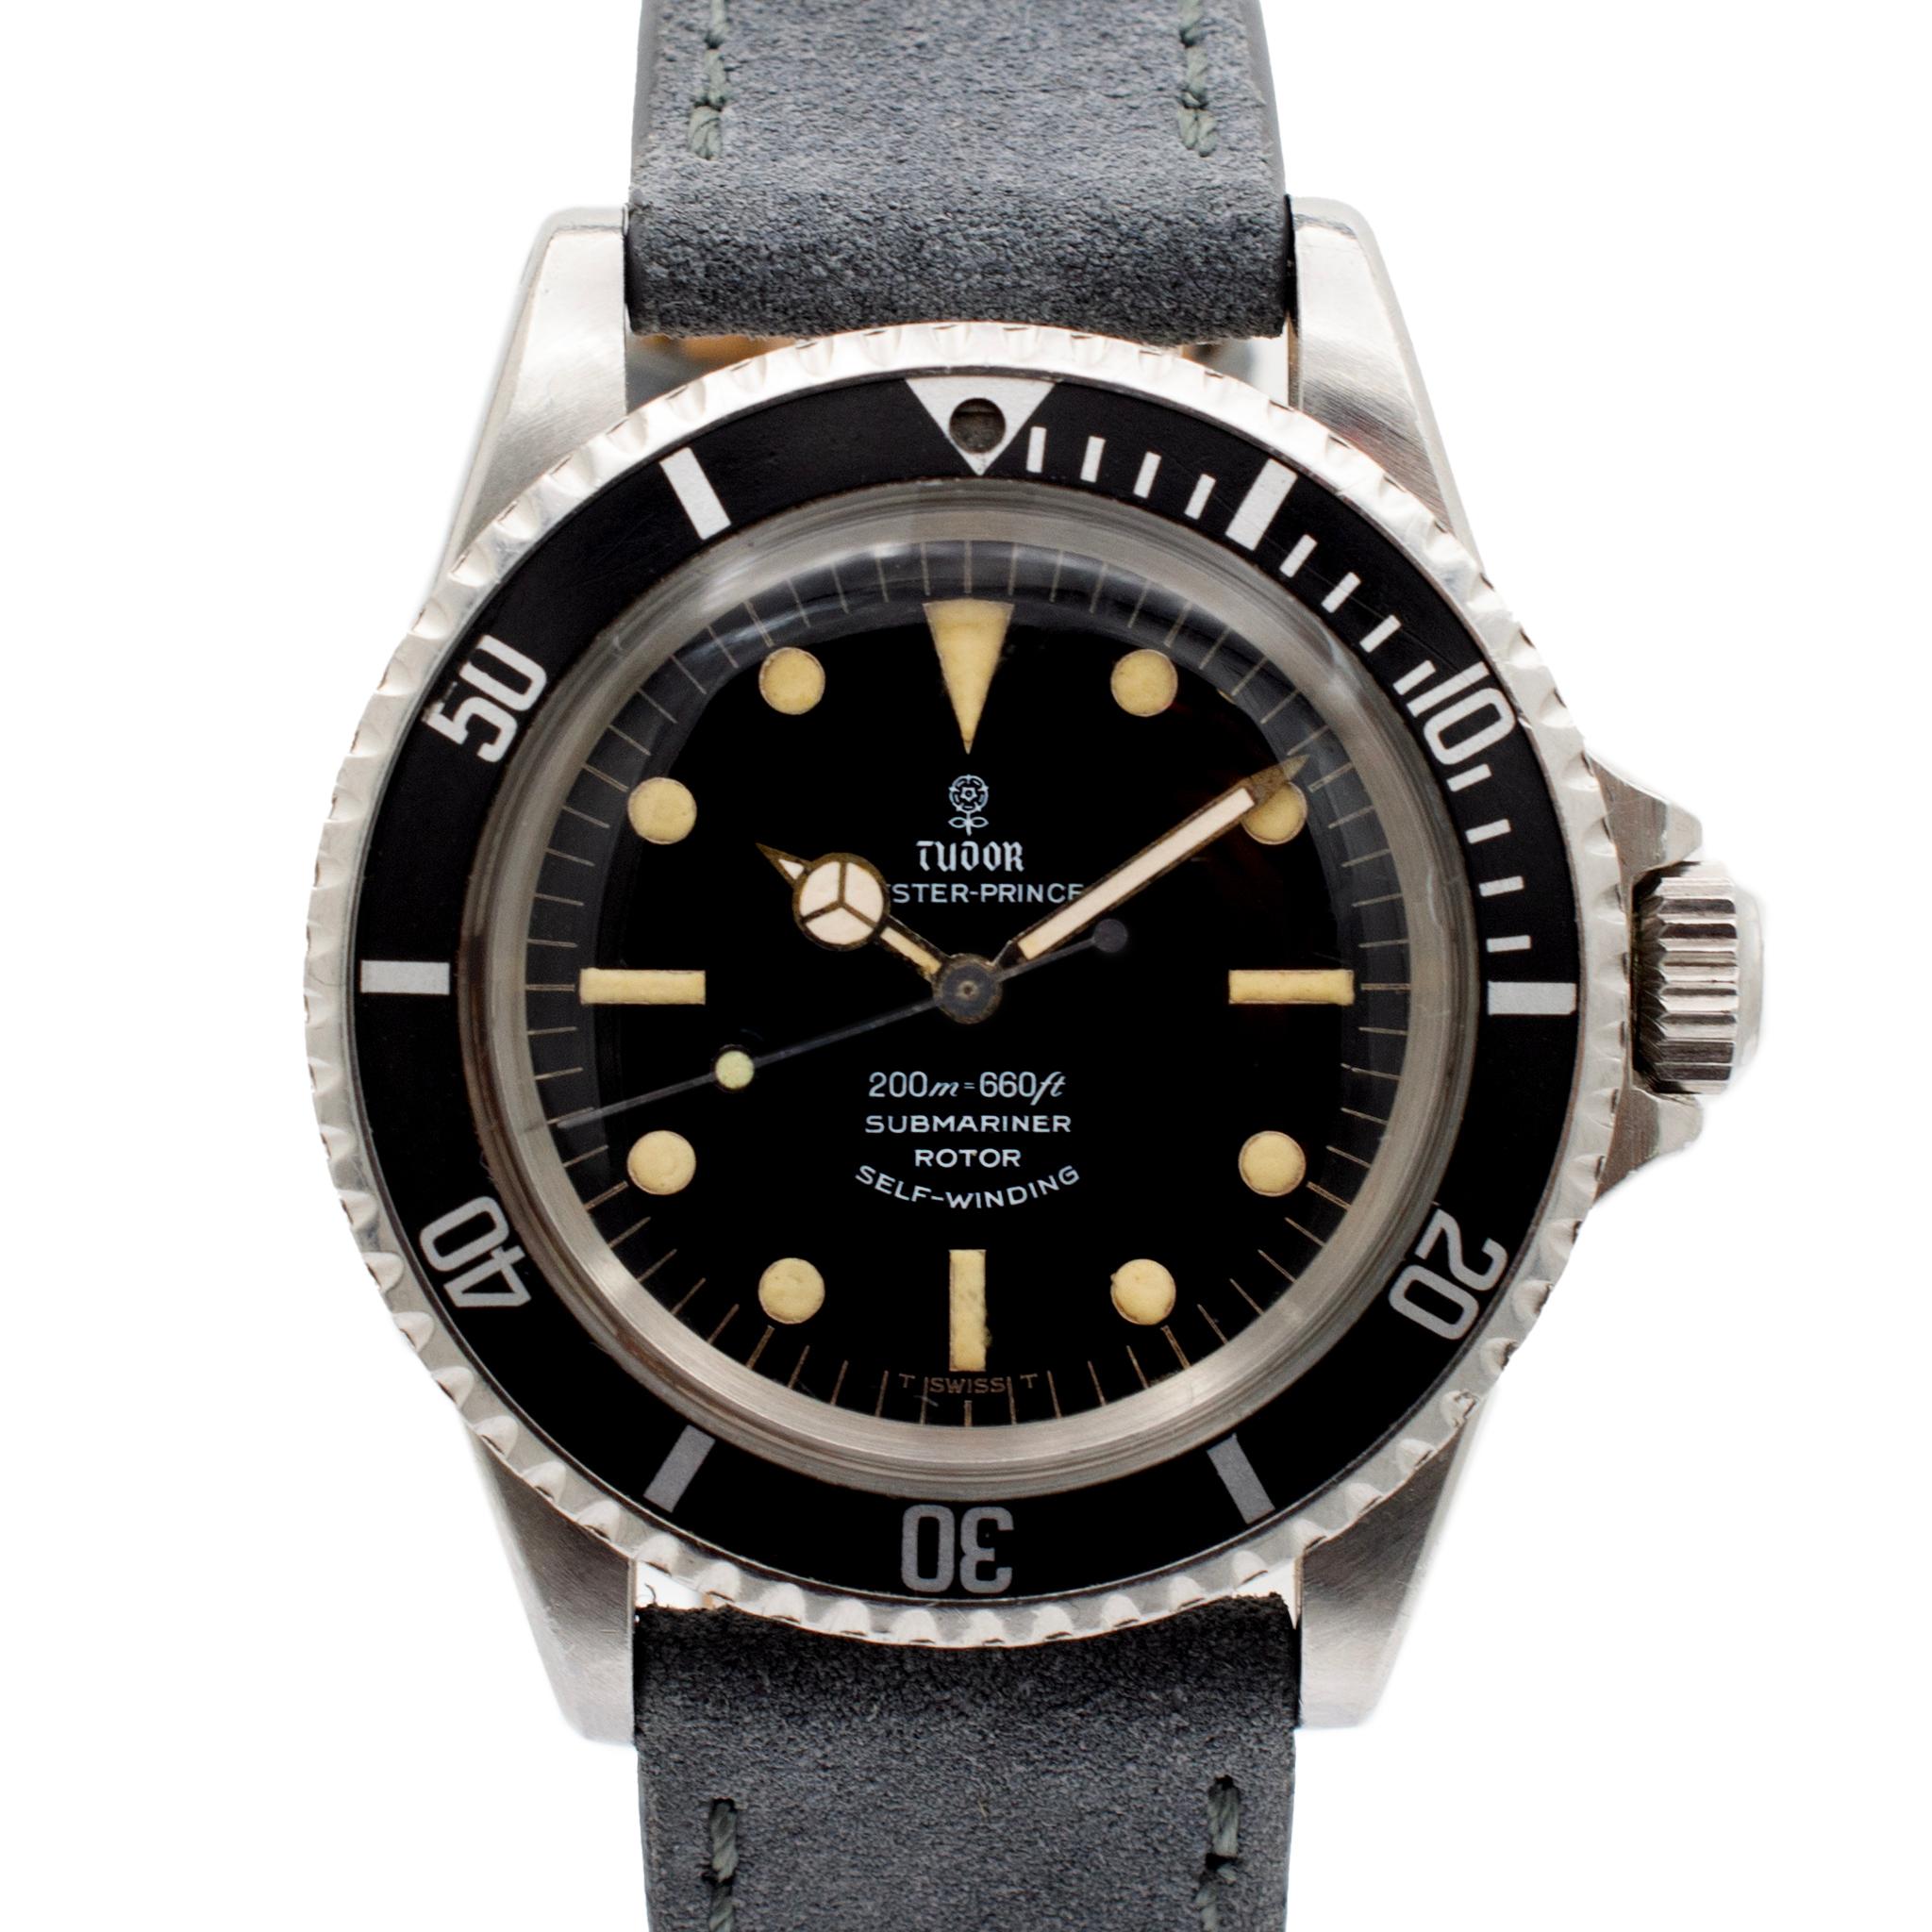 Brand: Tudor

Gender: Men's

Metal Type: Stainless Steel

Size: 5.5

Shank Maximum Width:

Weight: 77.20 grams

Gents stainless steel TUDOR Swiss made watch. The 